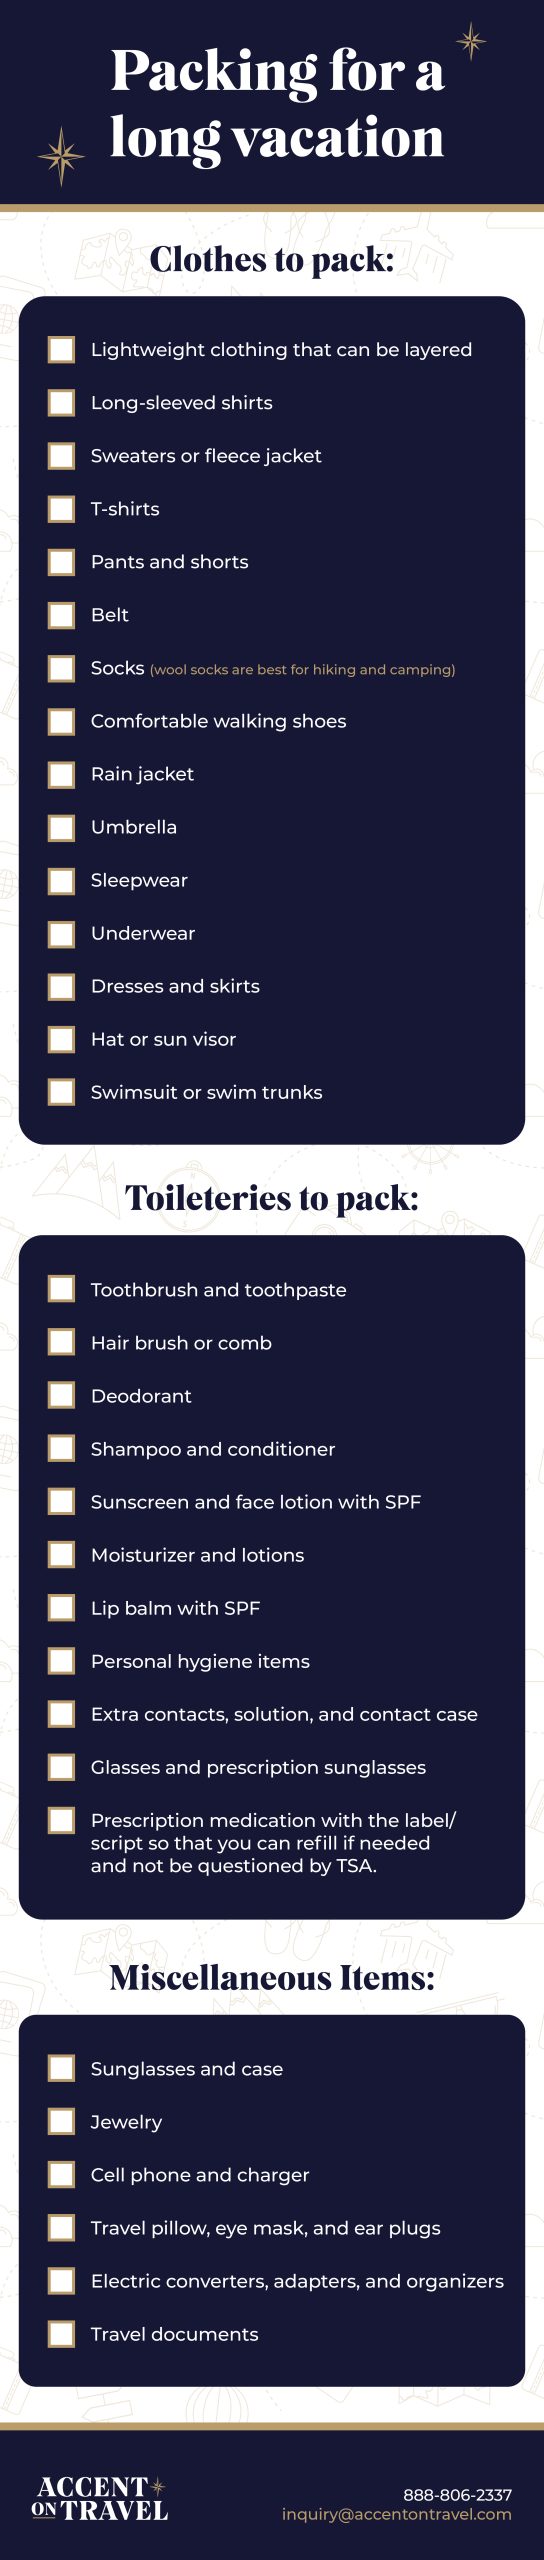 Packing for a long vacation checklist